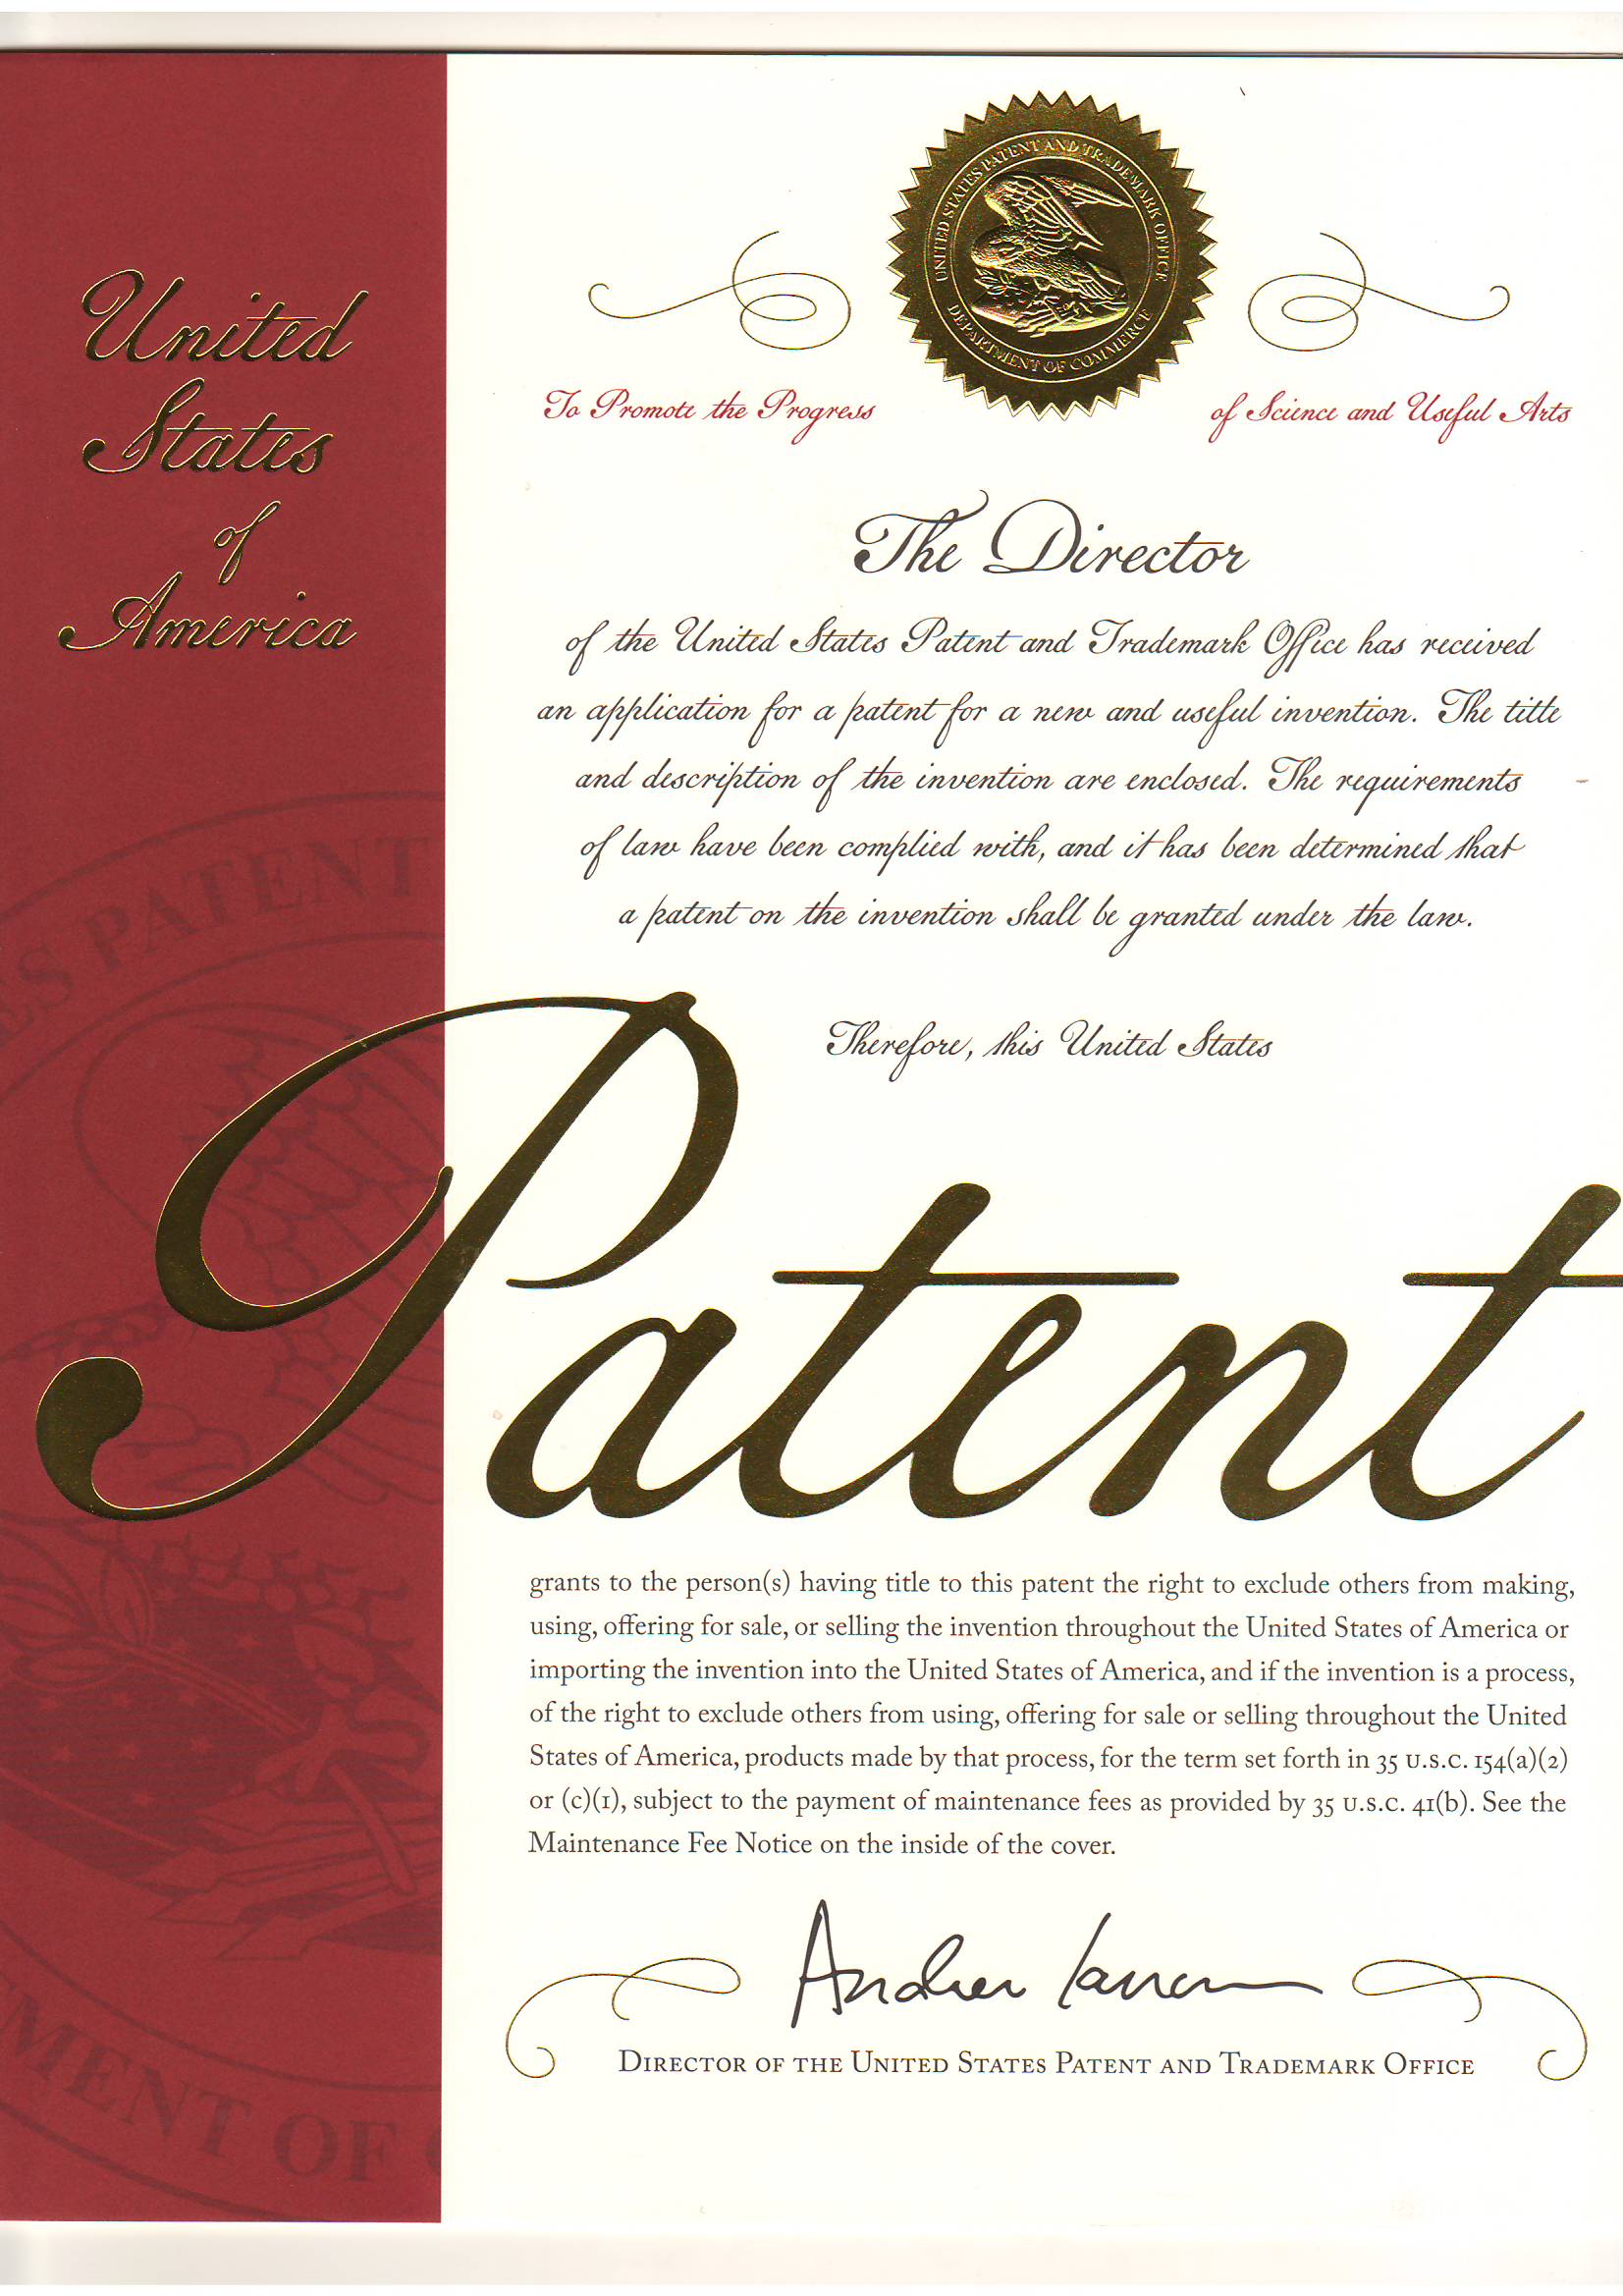 A Display of US Patent Certificates  - August 2018 2nd part